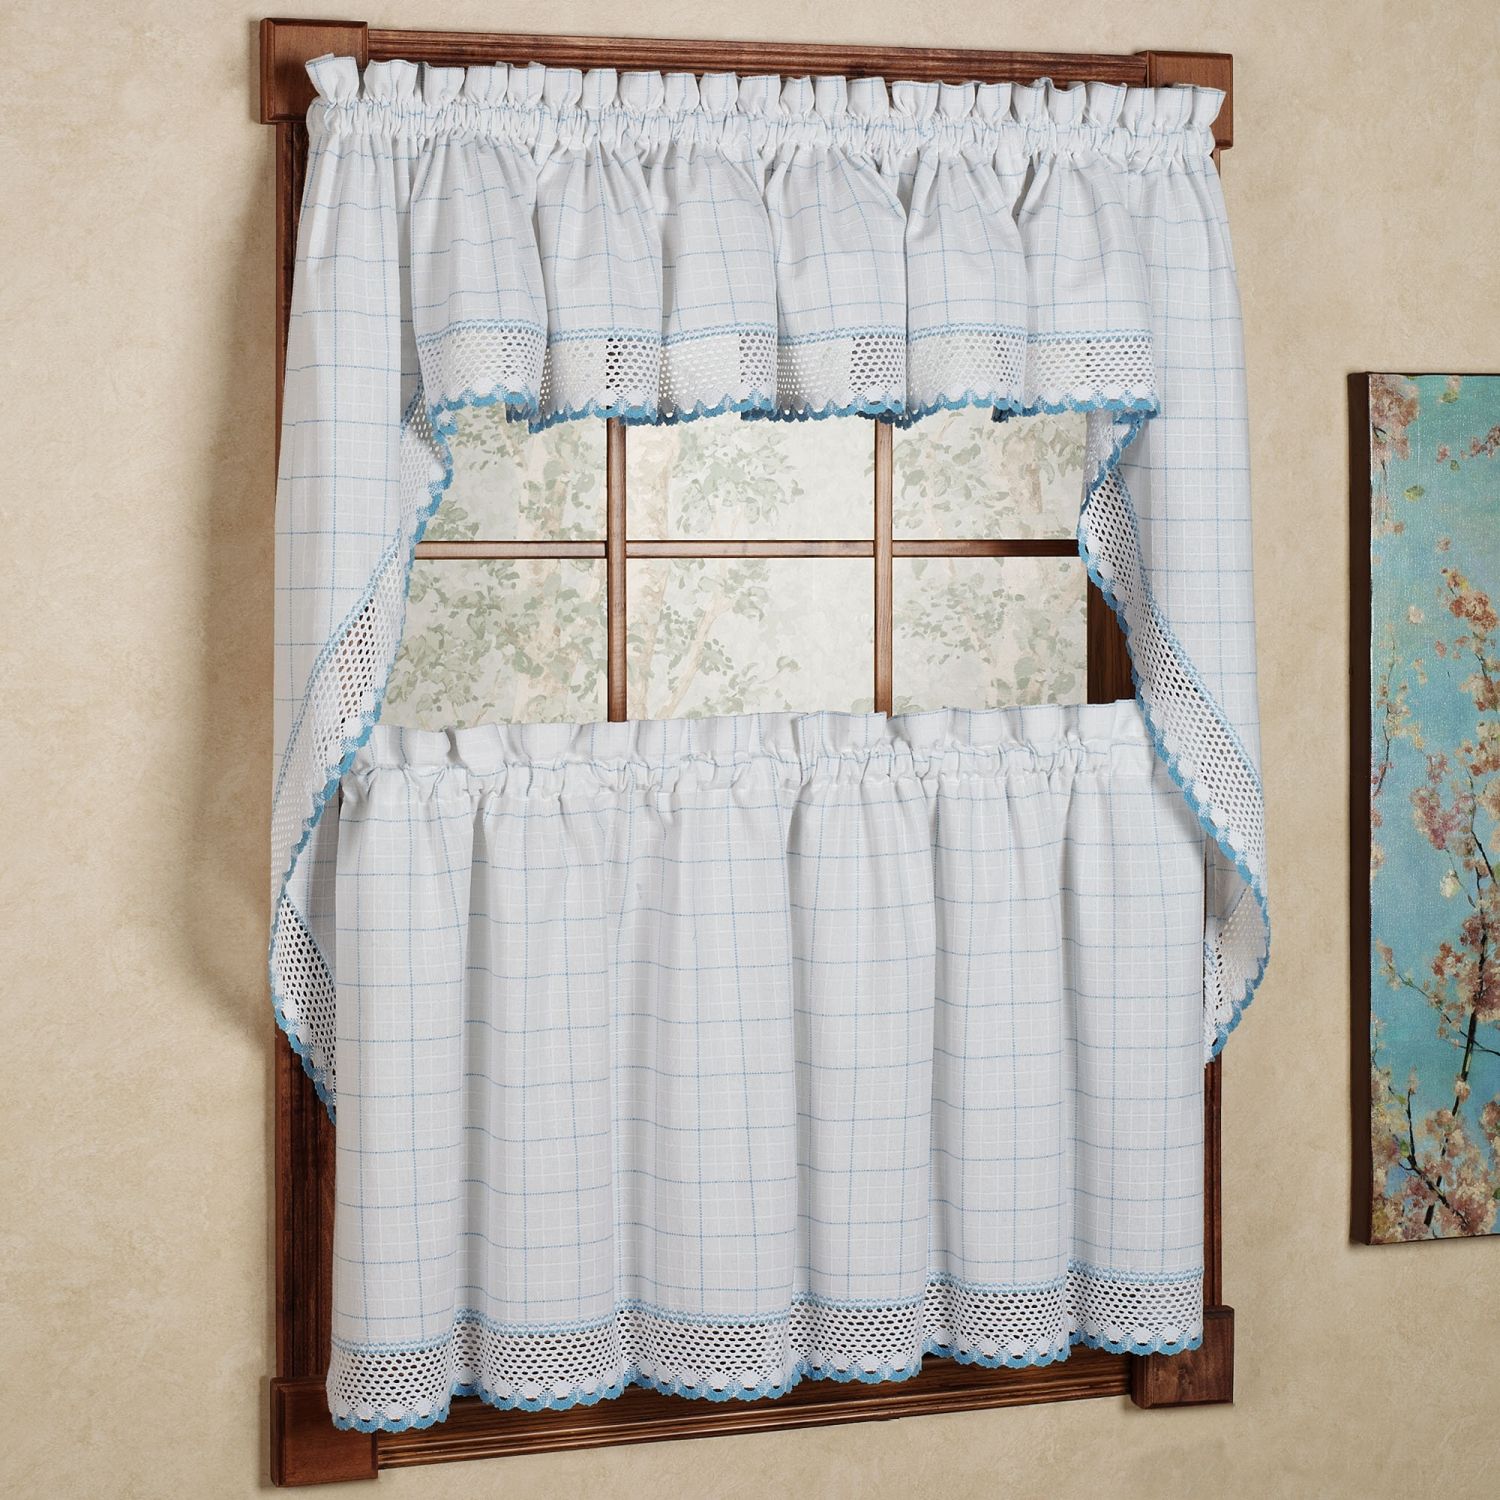 Details About Adirondack Cotton Kitchen Window Curtains – White/blue –  Tiers, Valance Or Swag With White Knit Lace Bird Motif Window Curtain Tiers (Photo 12 of 20)